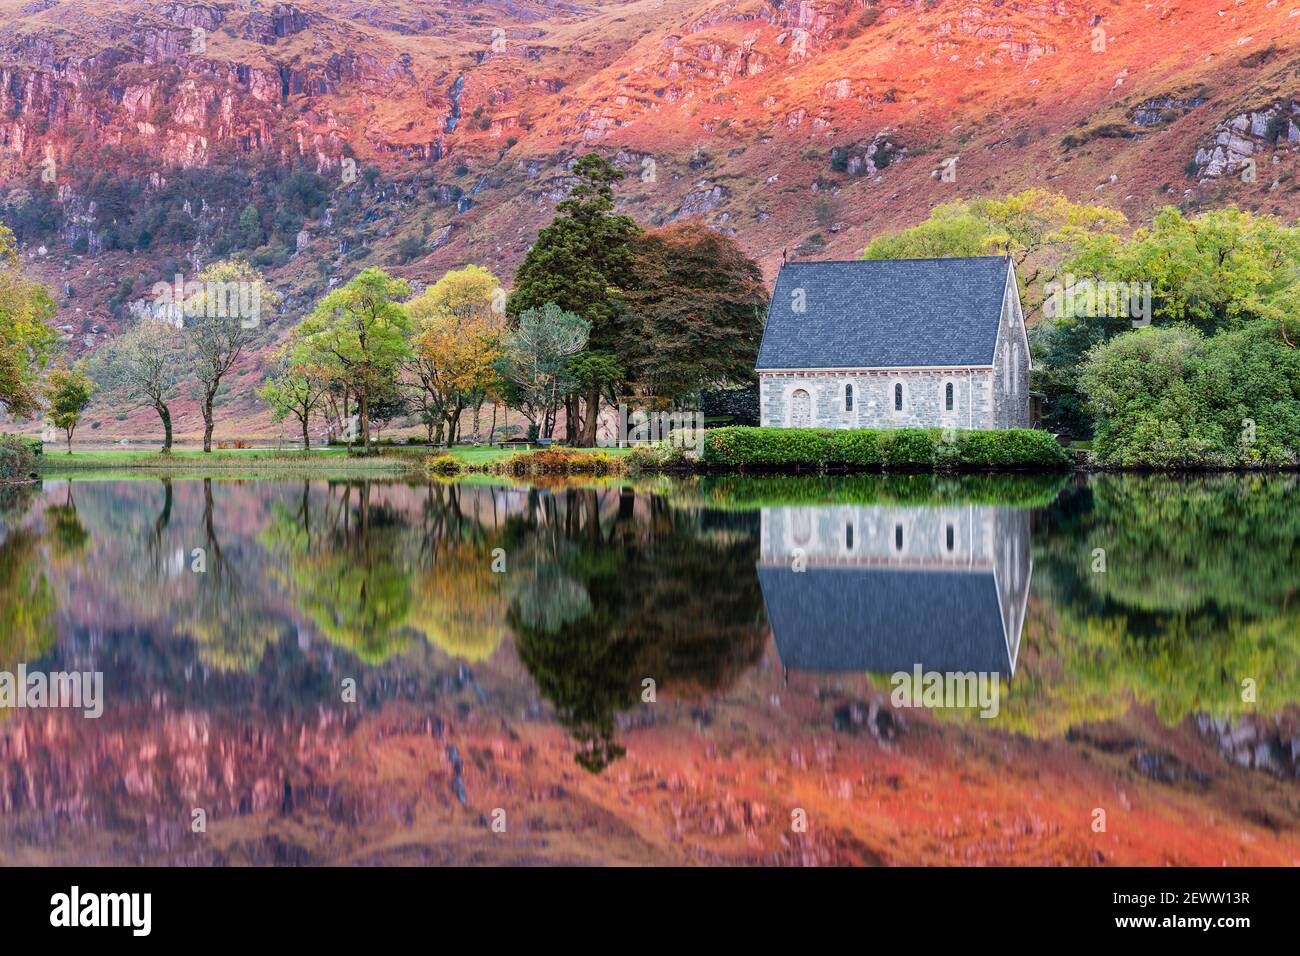 Sunrise lights up the mountains in autumn colours behind St Finbarr's Oratory and reflects in the lake at Gougane Barra, West Cork, Ireland. Stock Photo